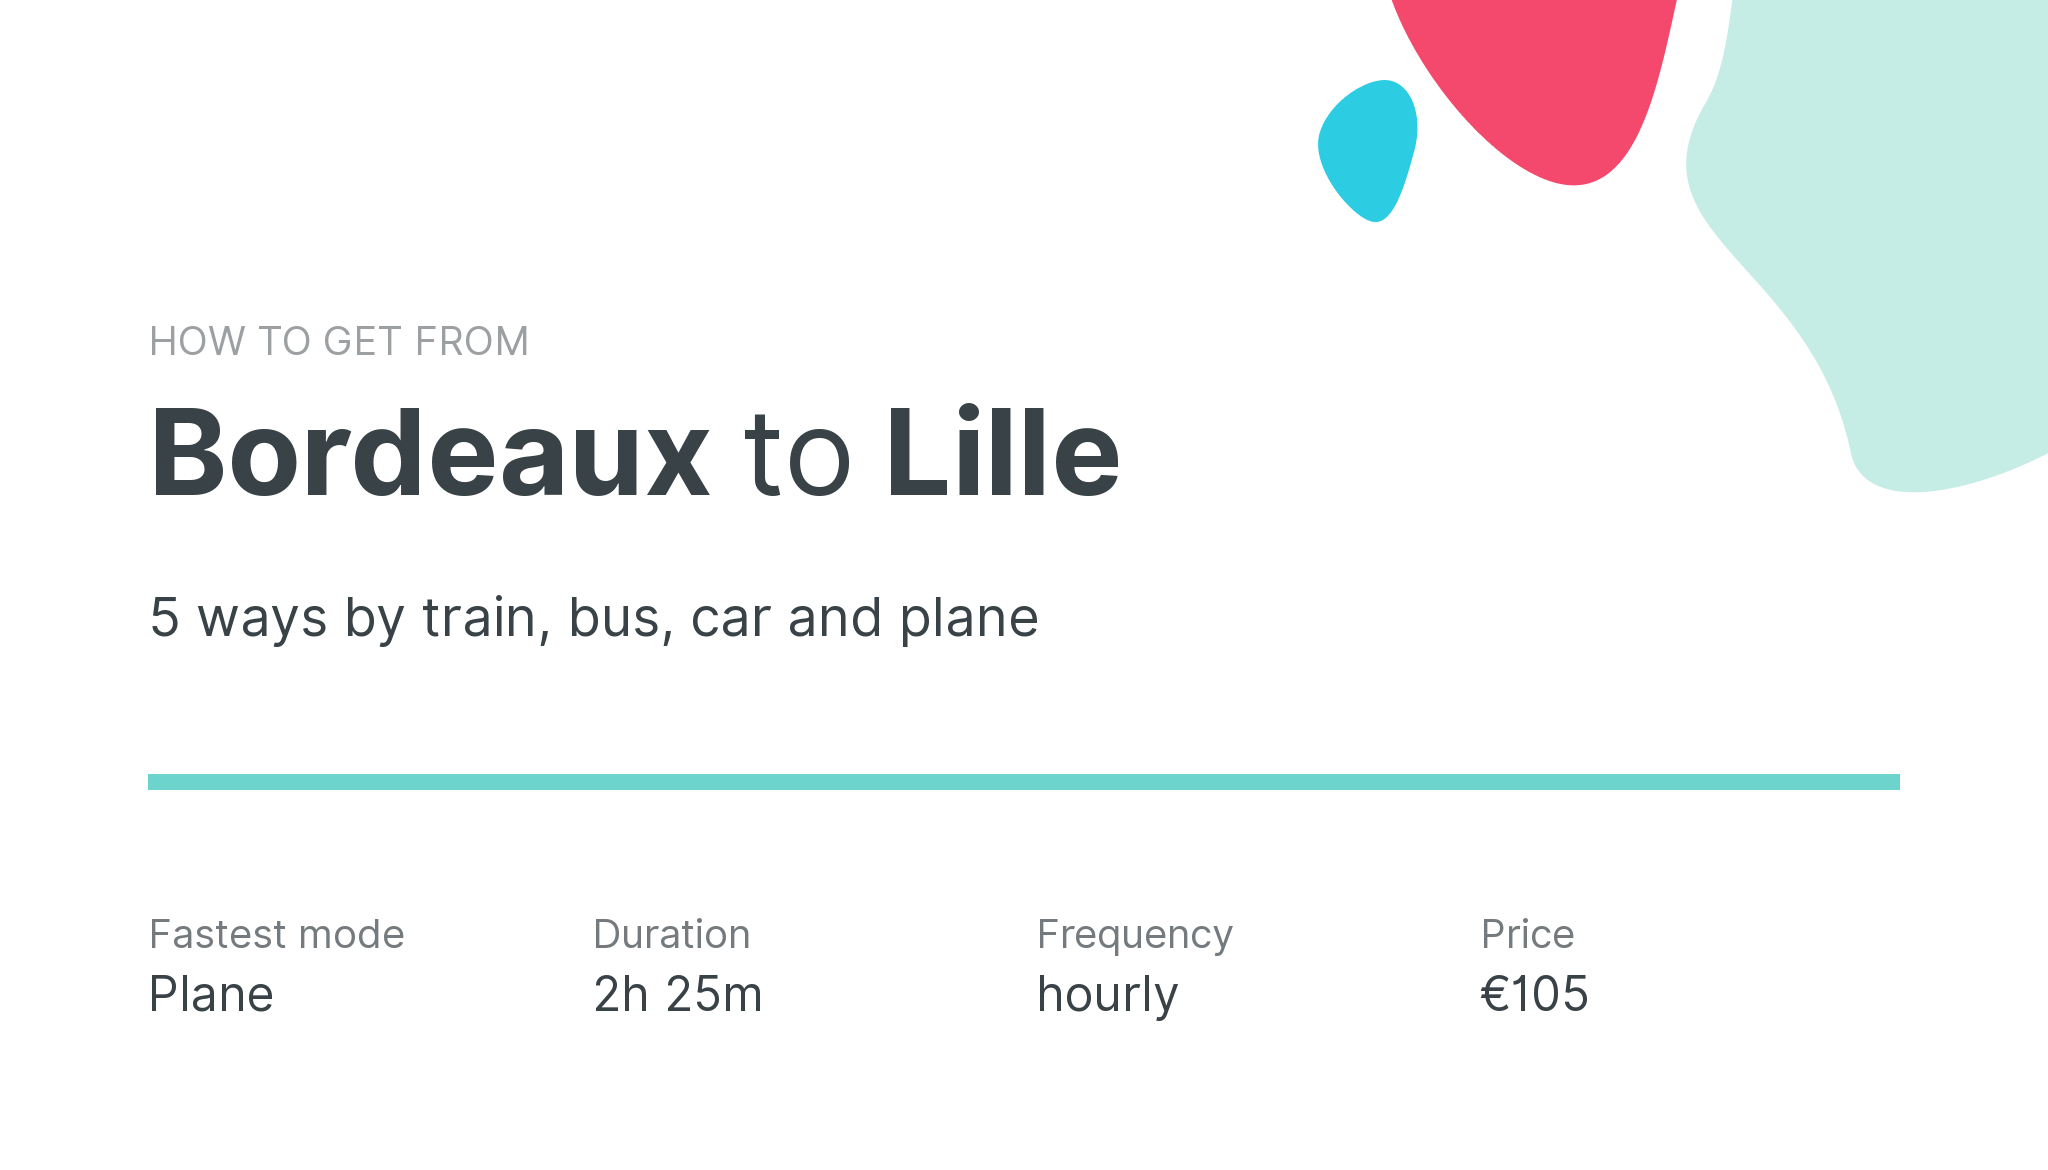 How do I get from Bordeaux to Lille